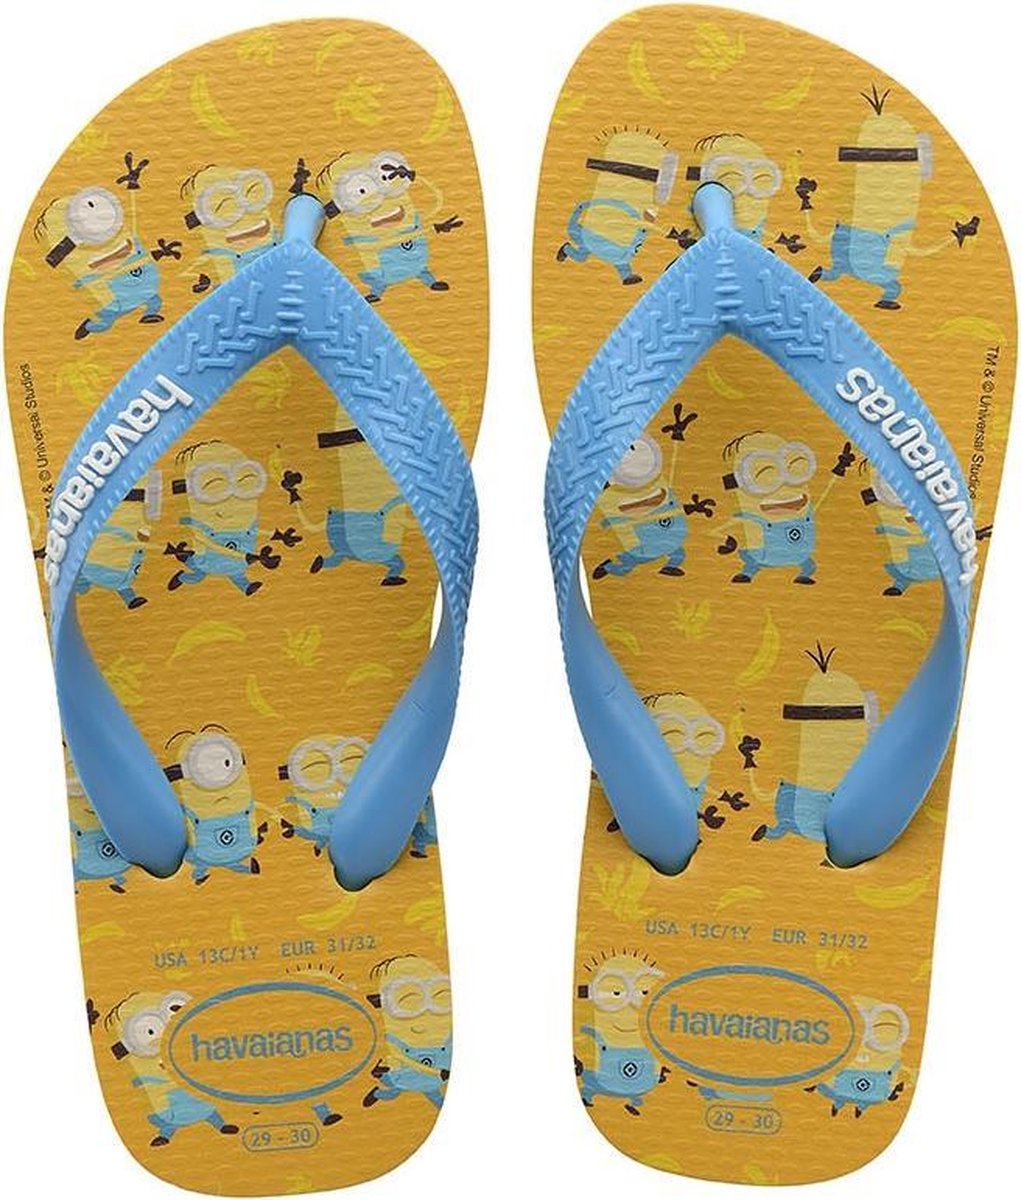 Havaianas - Maat 29/30 - Minions Slippers - Gold Yellow DGM Outlet